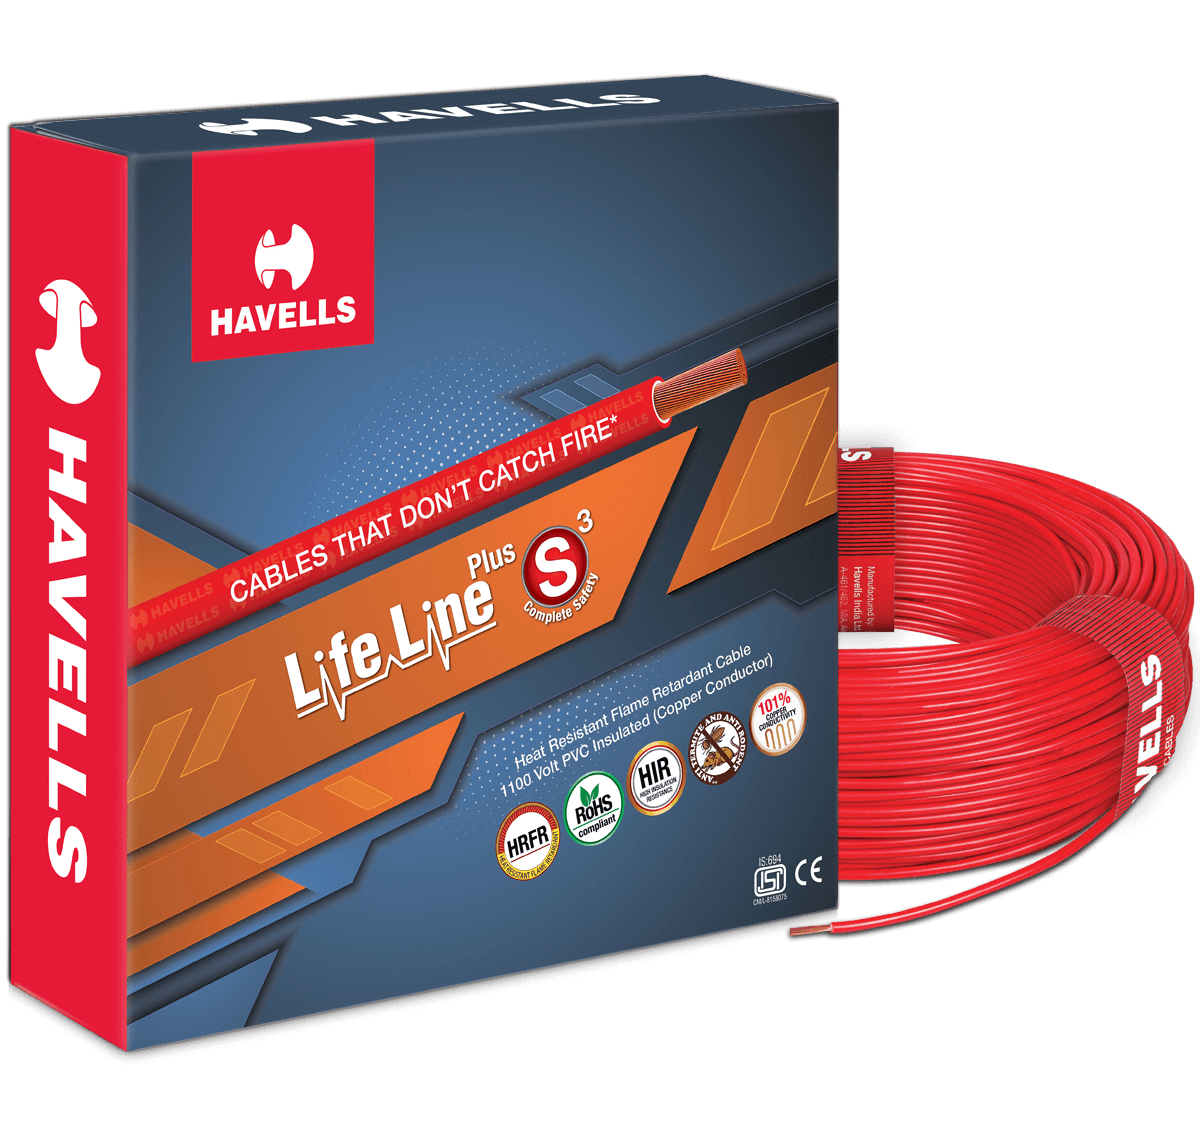 HAVELLS LIFE LINE PLUS S3 HRFR CABLES 2.5MM 90MTR LENGTH COPPER WIRE